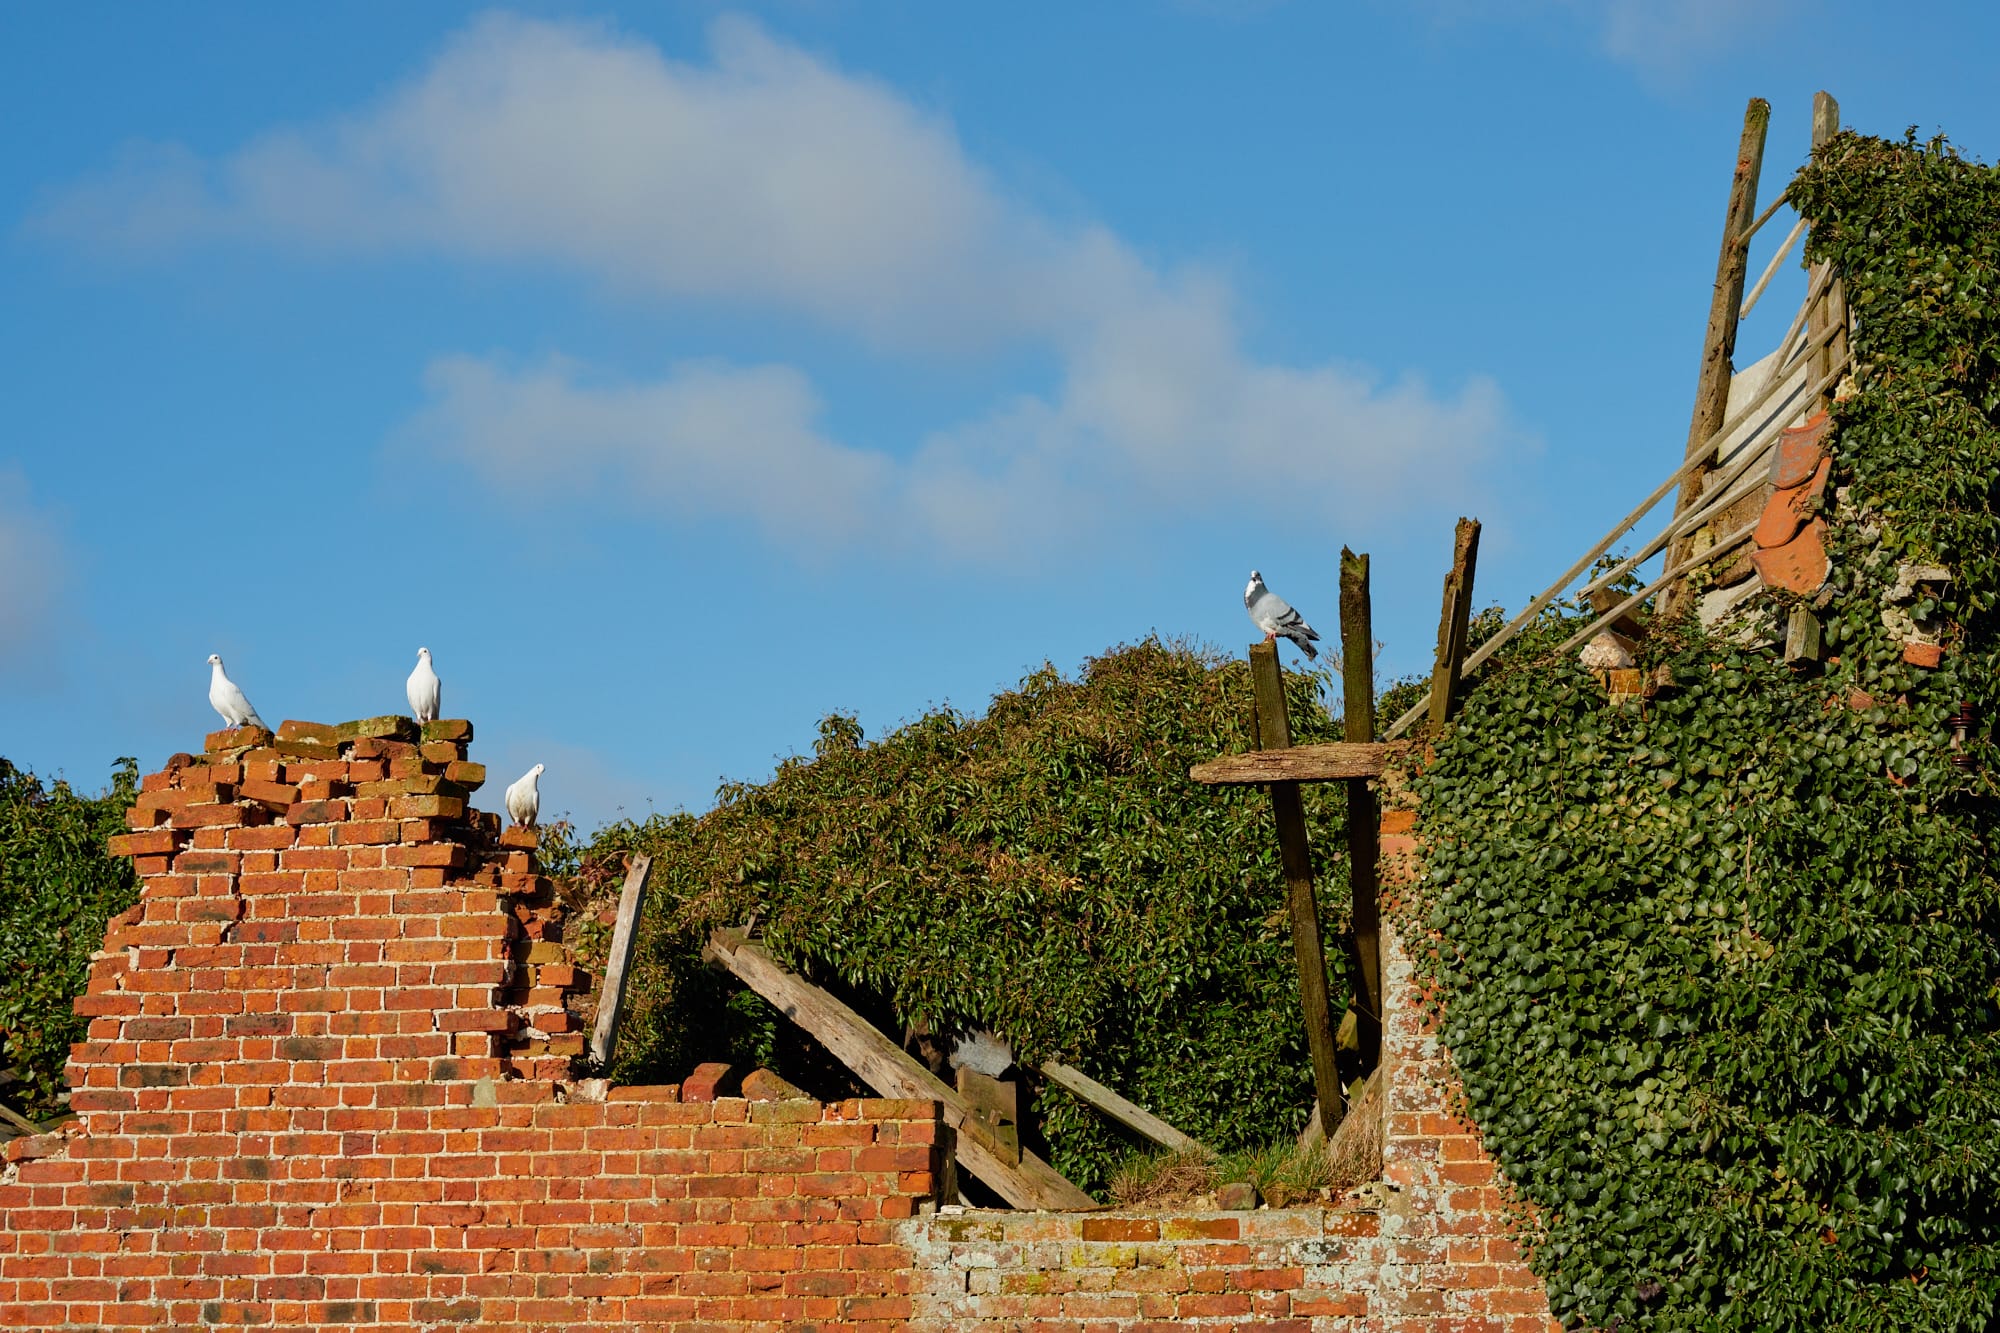 birds on a ruined building